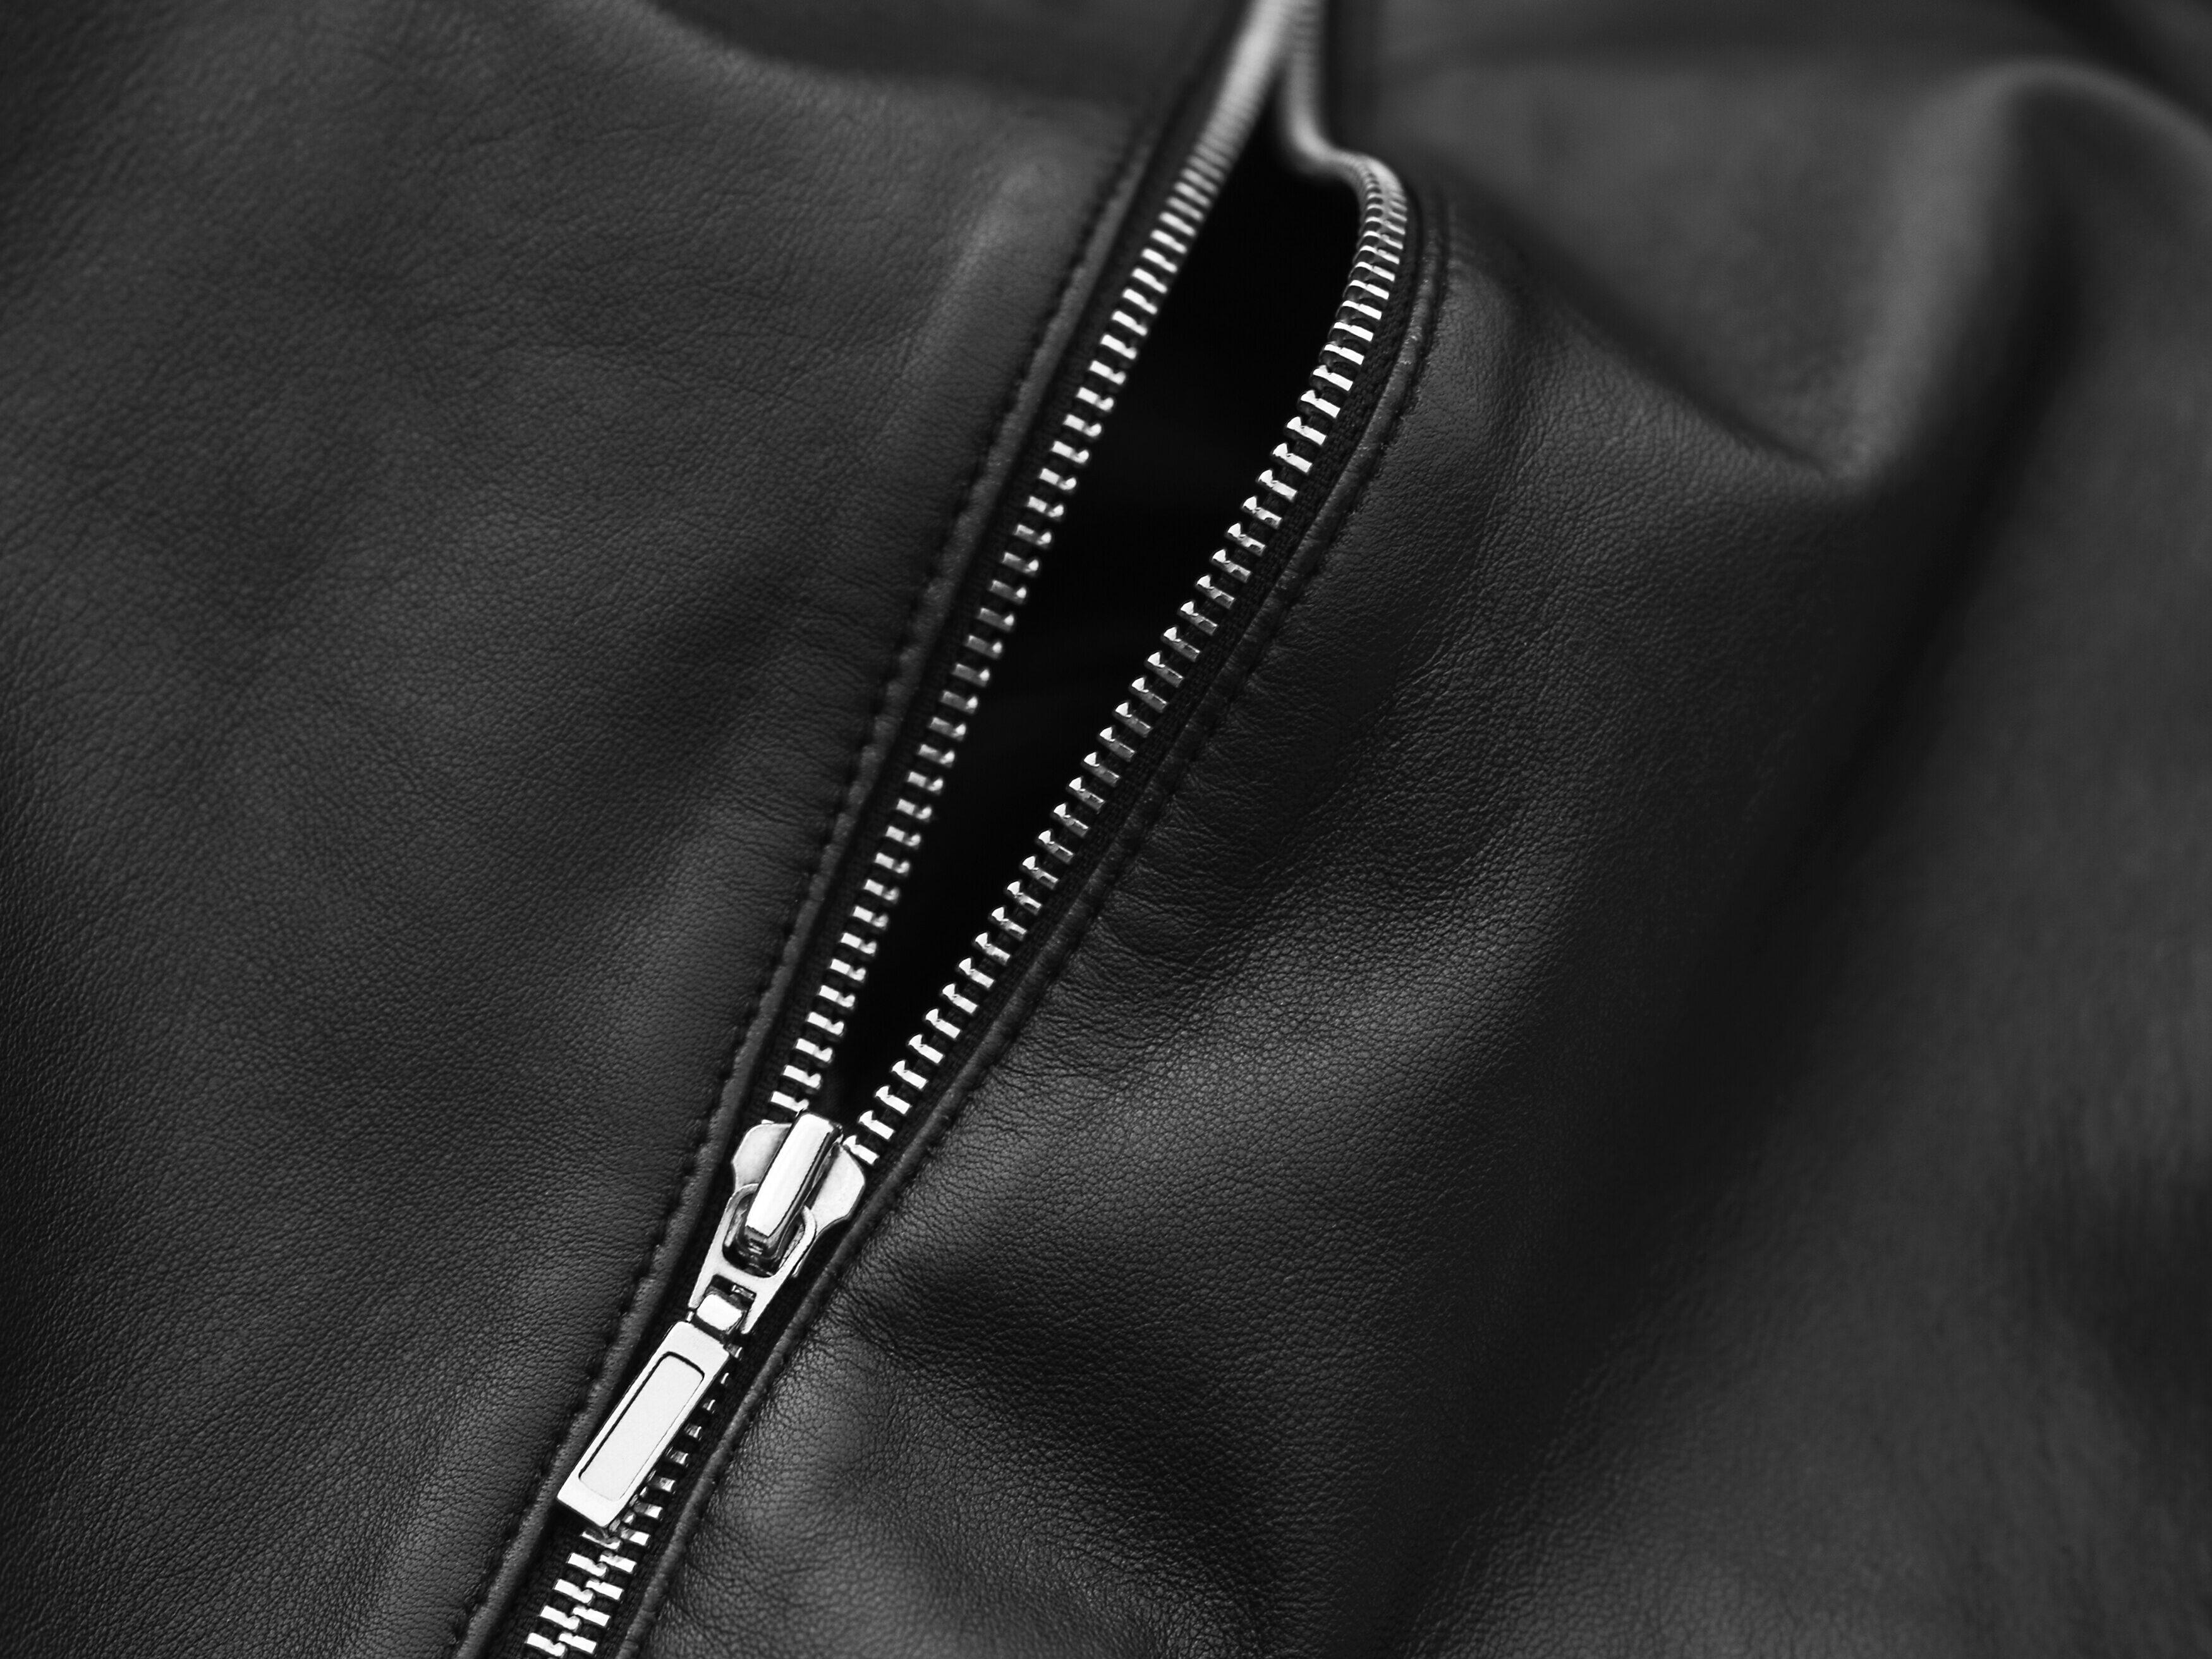 Among the Swedish brands and innovations, we find the zip. Here, a zip in a black jacket.